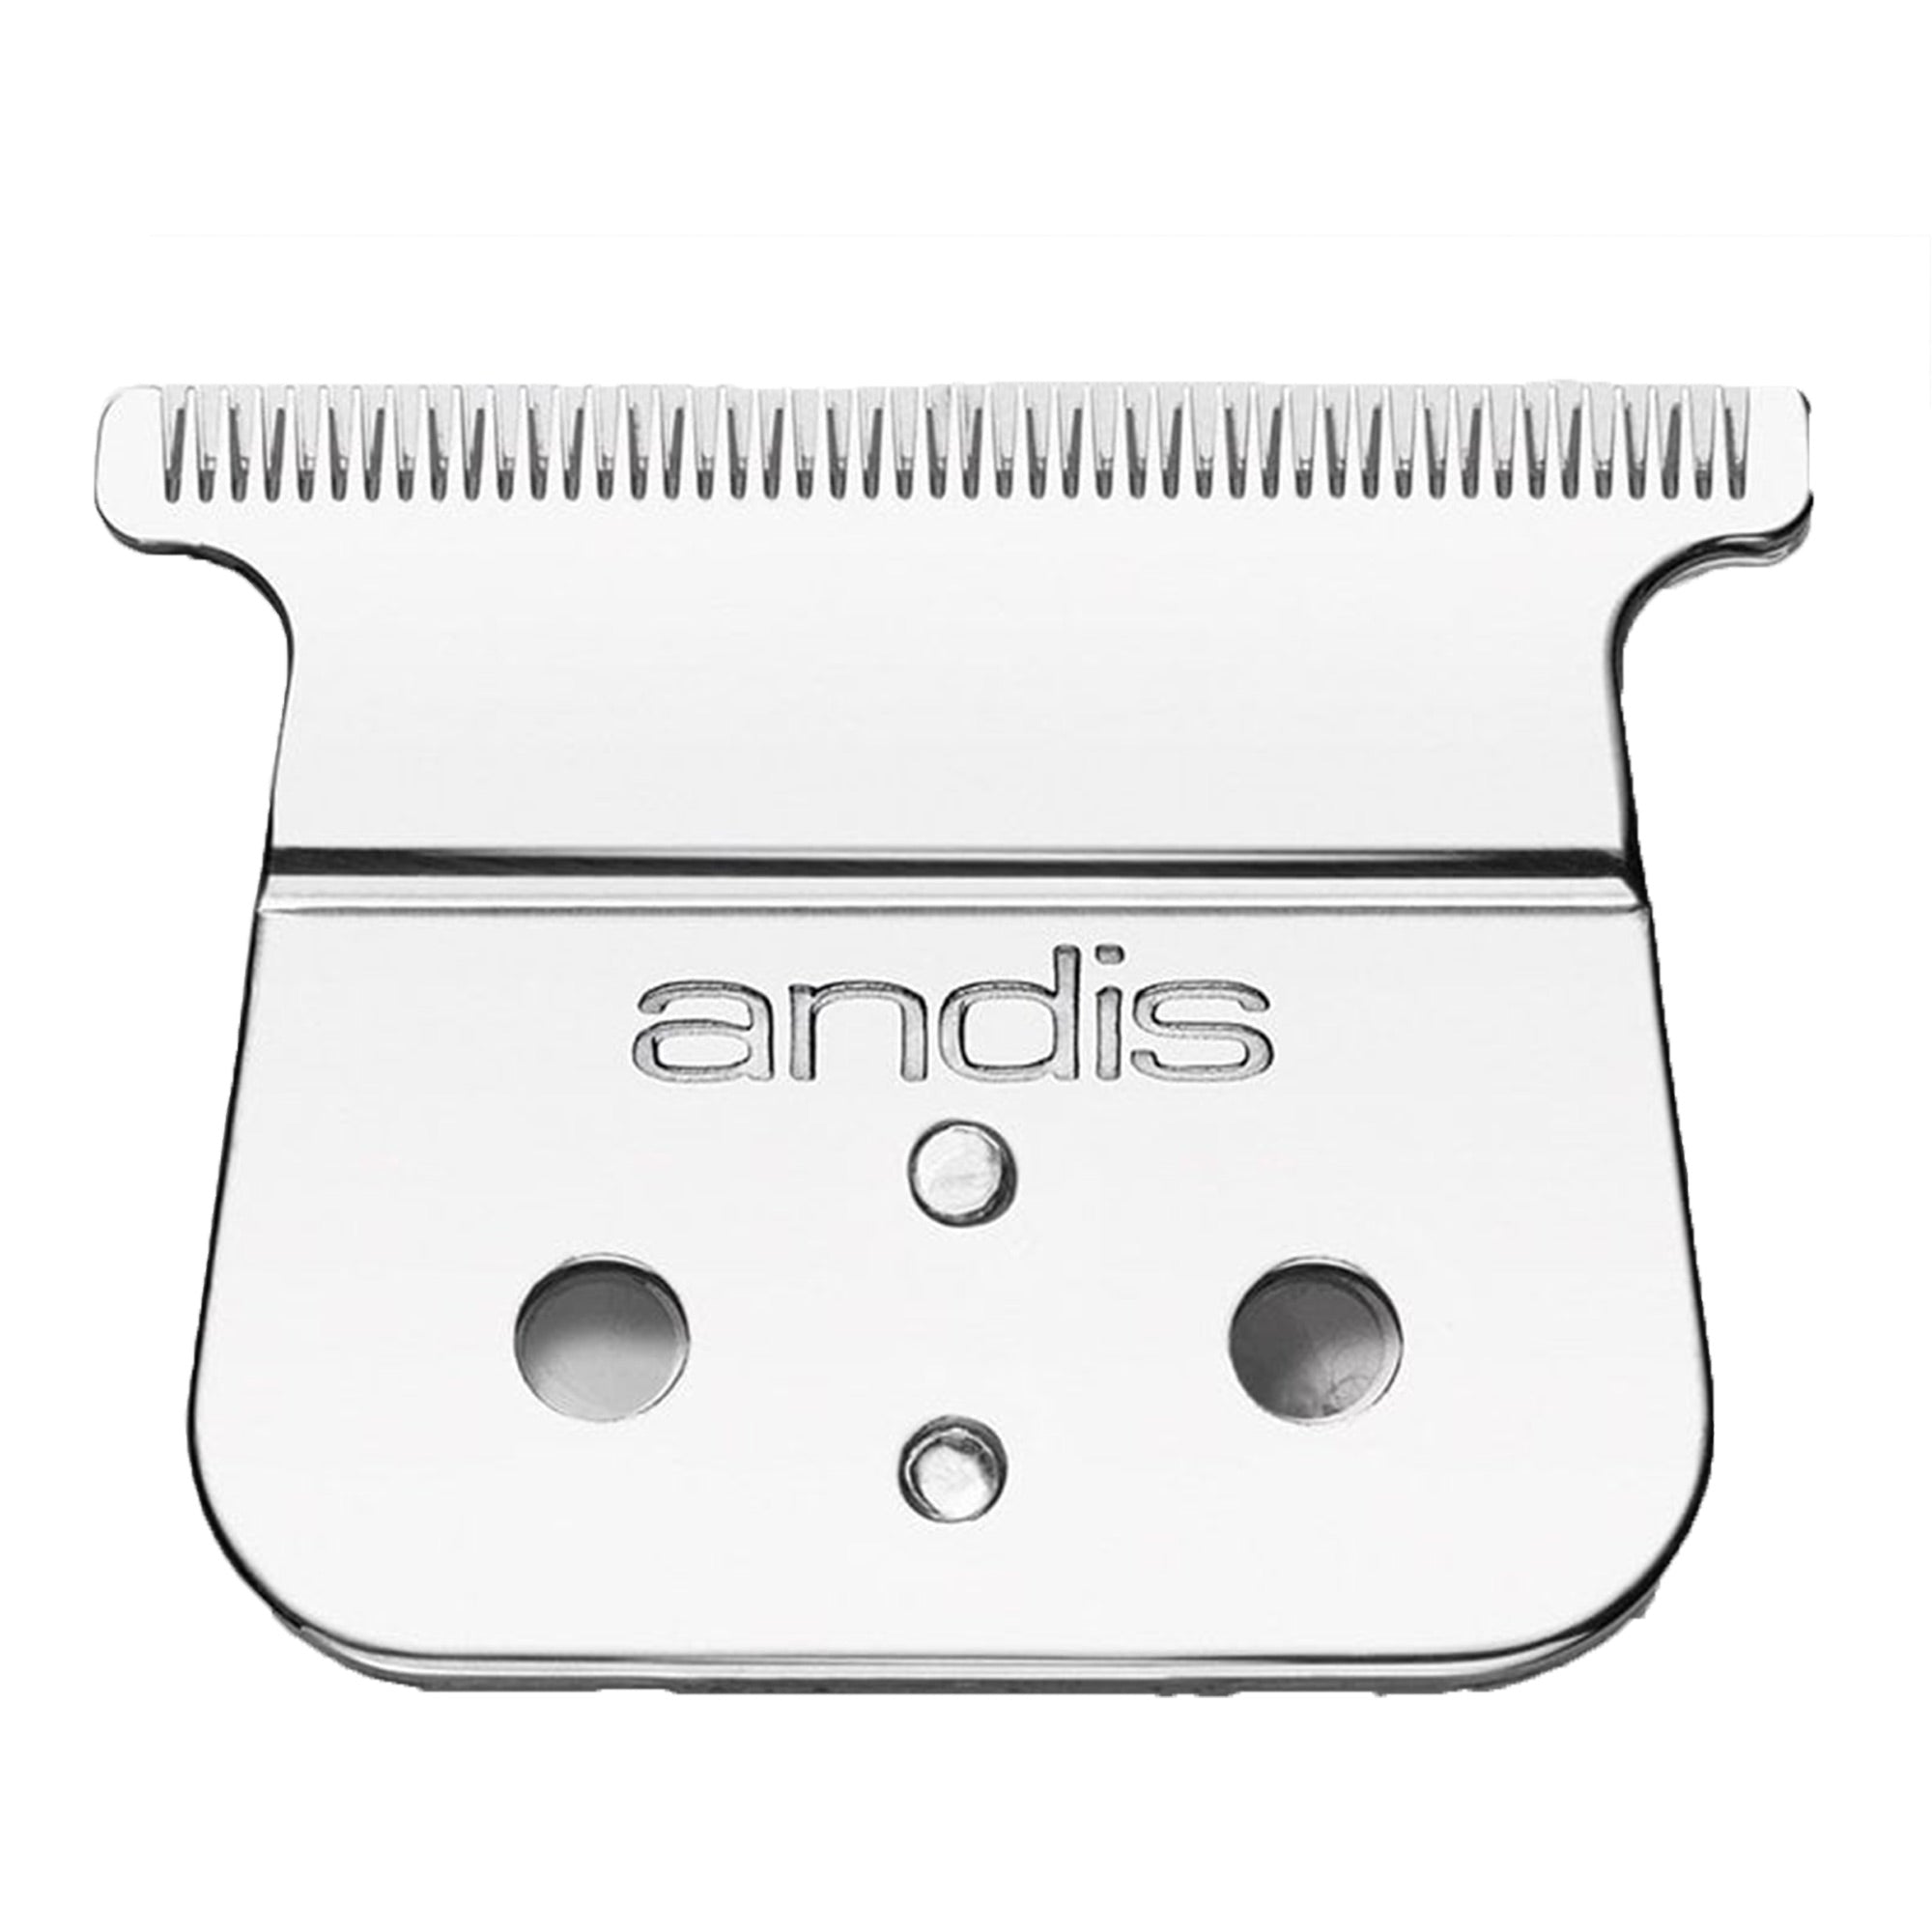 Andis - Slimline D8 PRO GTX Replacement Blade #32735 - Eson Direct